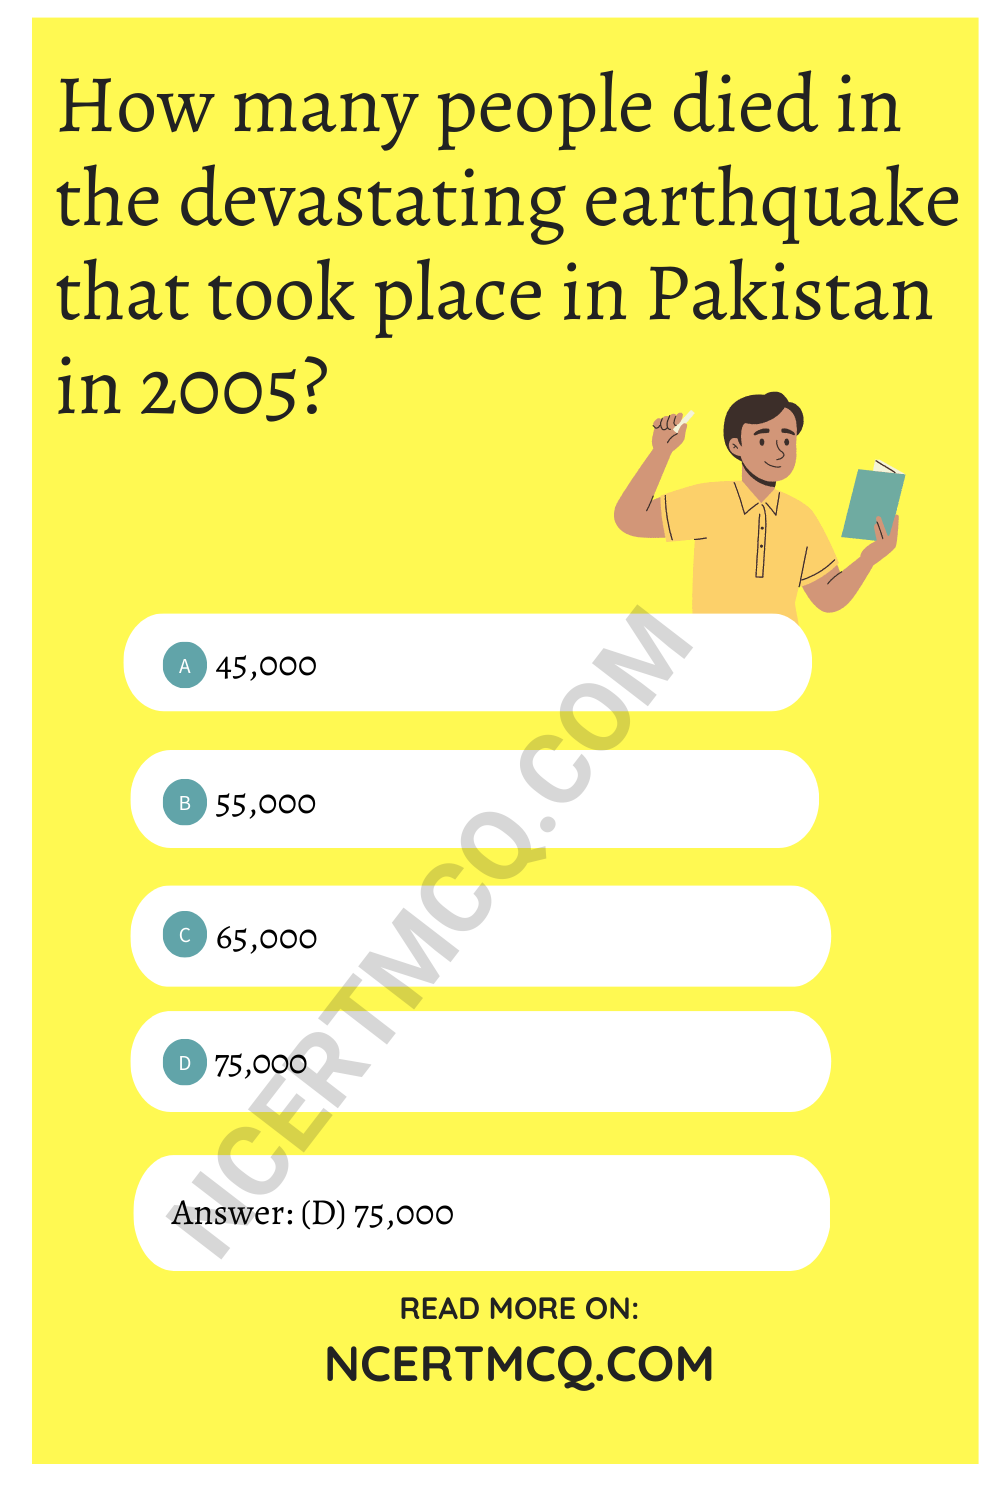 How many people died in the devastating earthquake that took place in Pakistan in 2005?